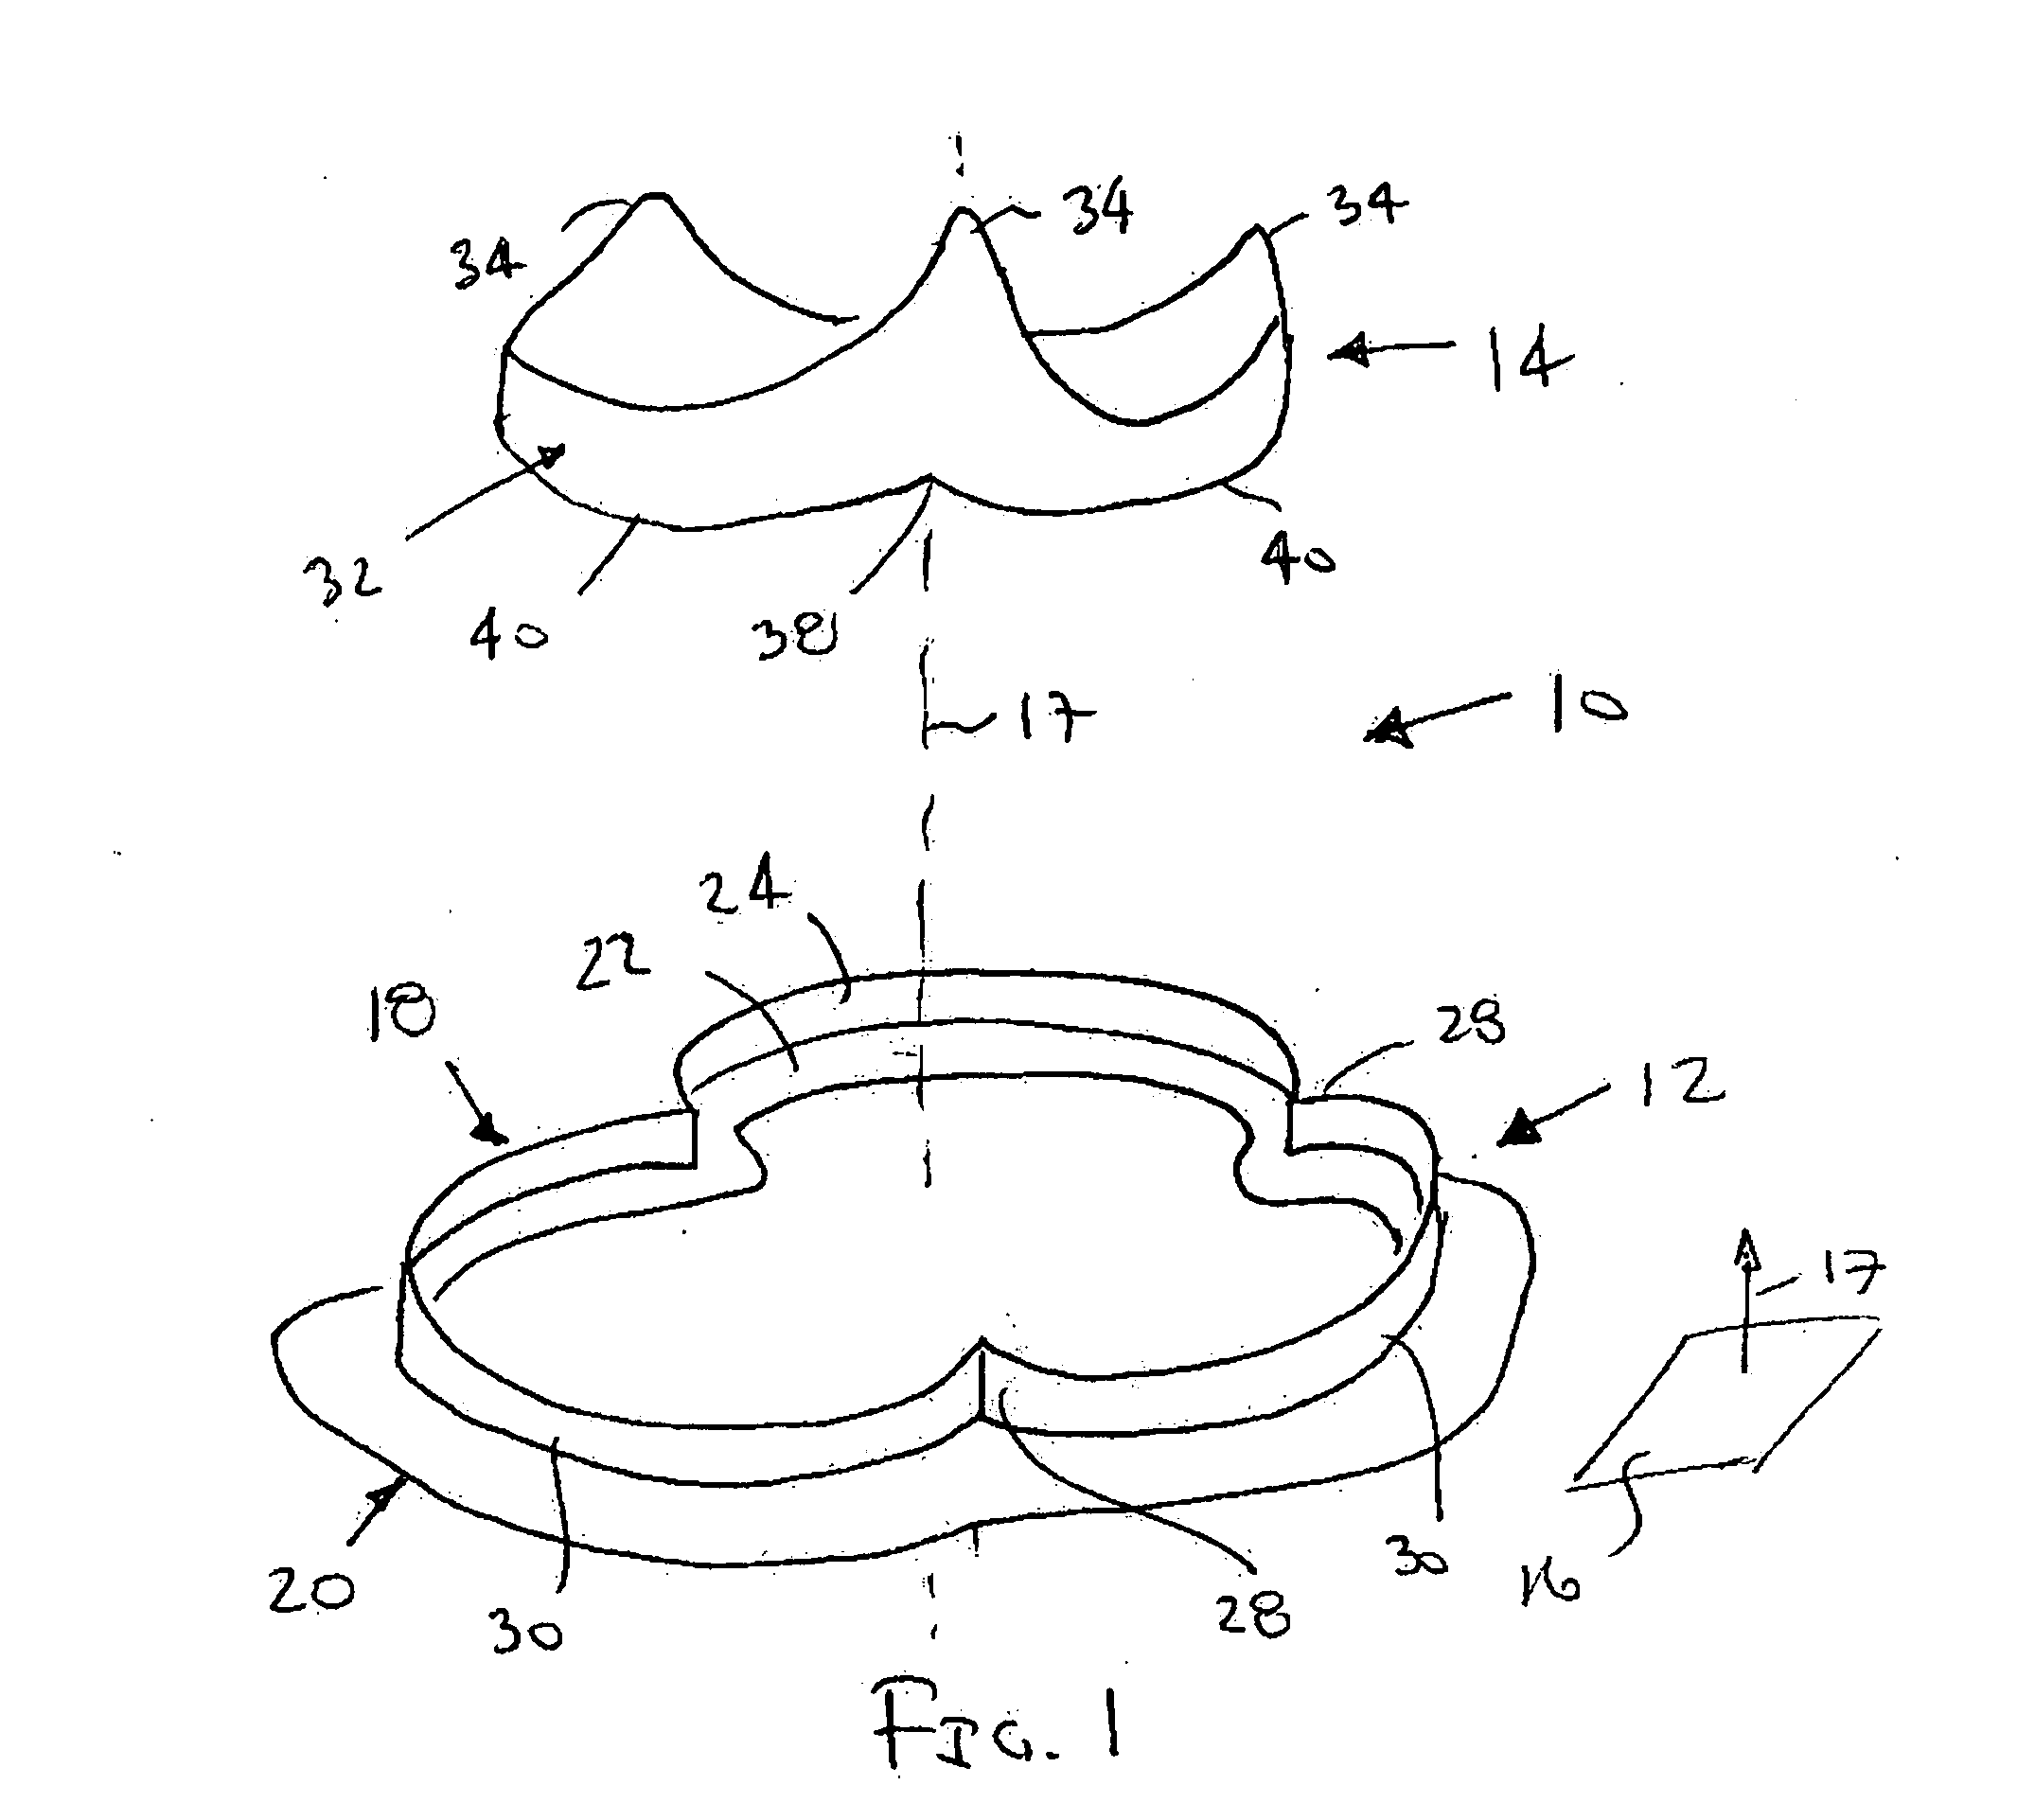 Connectors for two piece heart valves and methods for implanting such heart valves